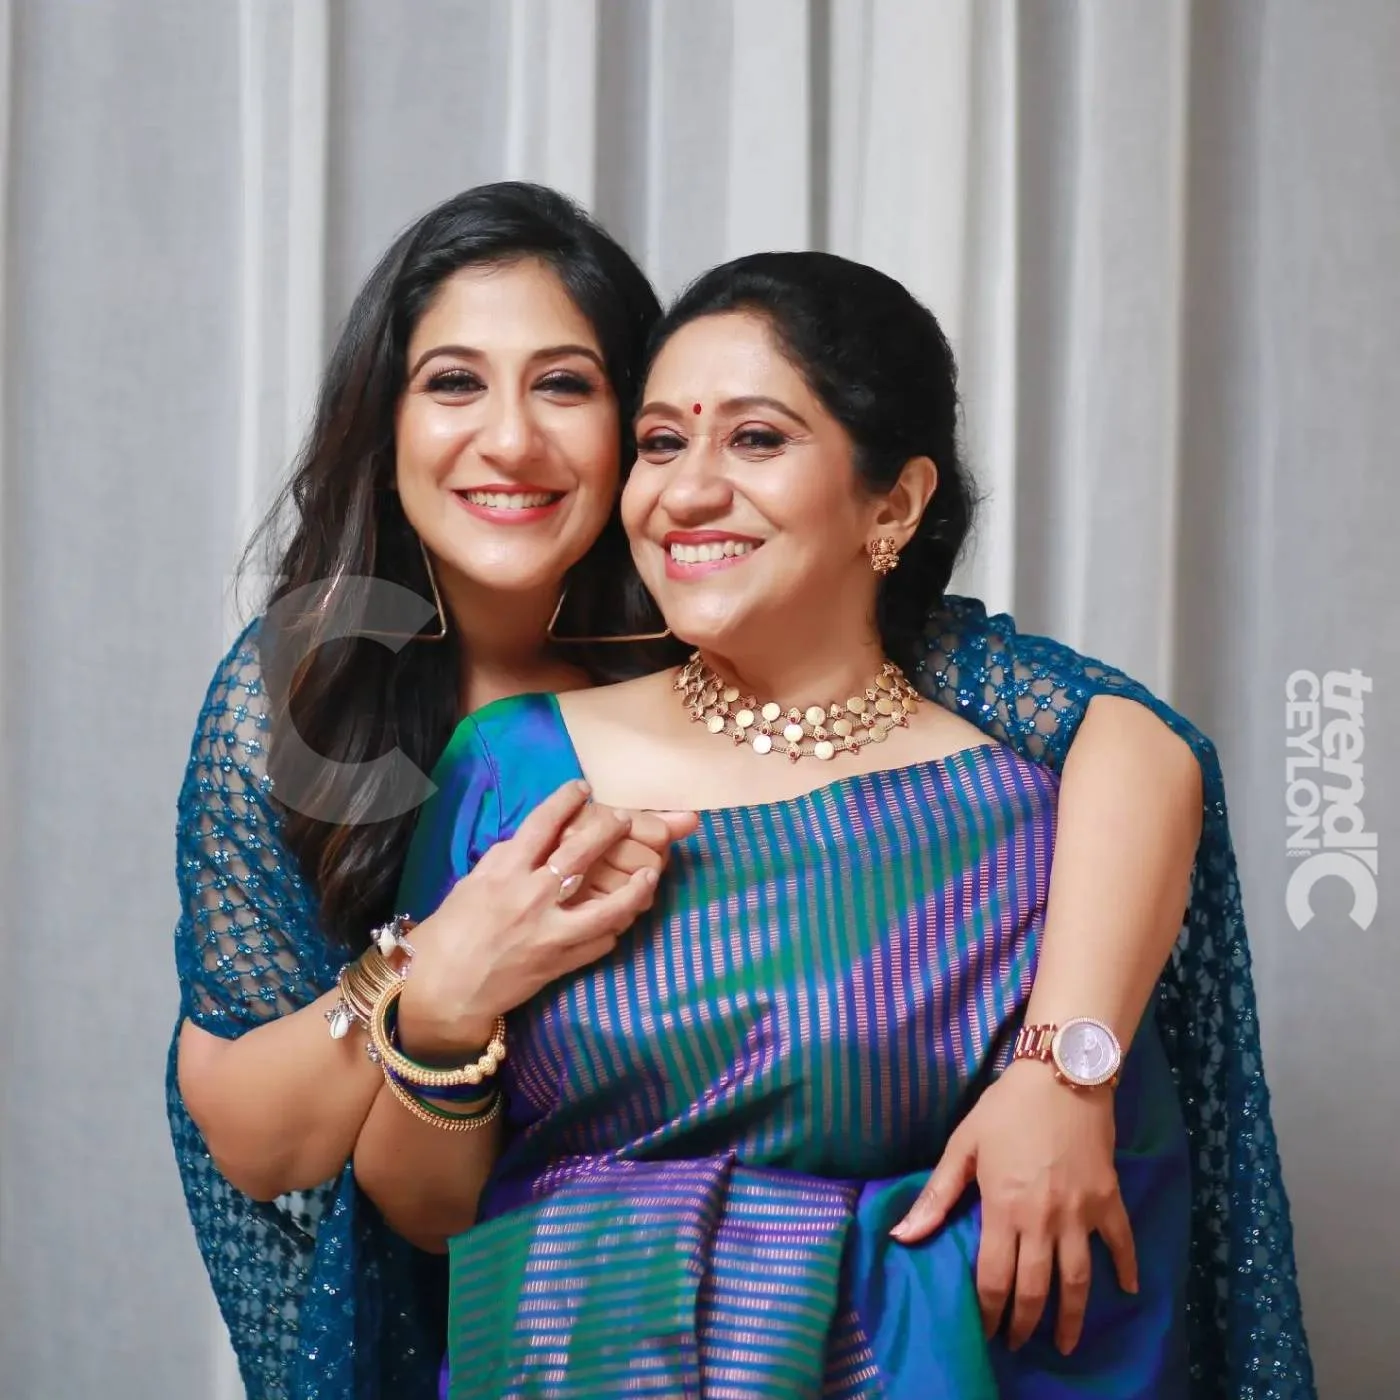 Look at this lovely musical family! Sujatha & Shweta Mohan